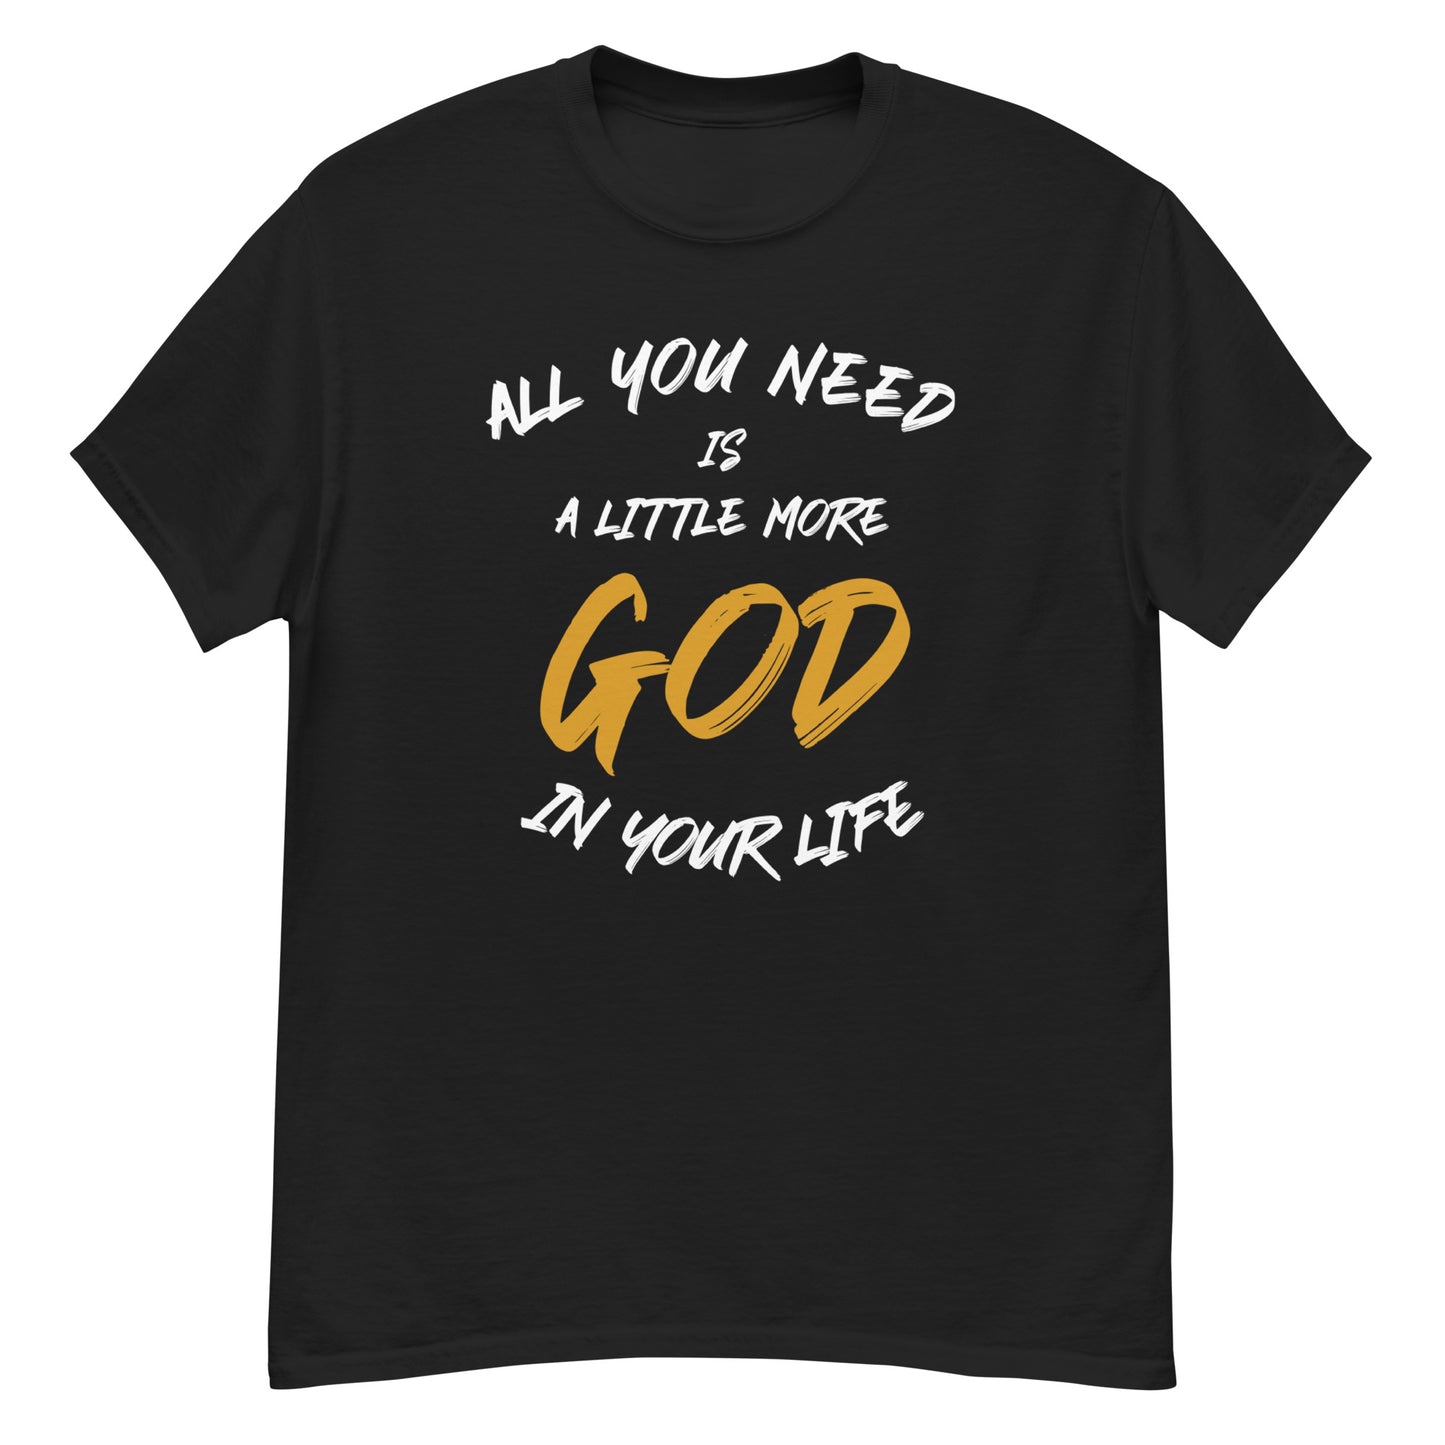 All you need is a little more God in your life classic tee (white lettering)